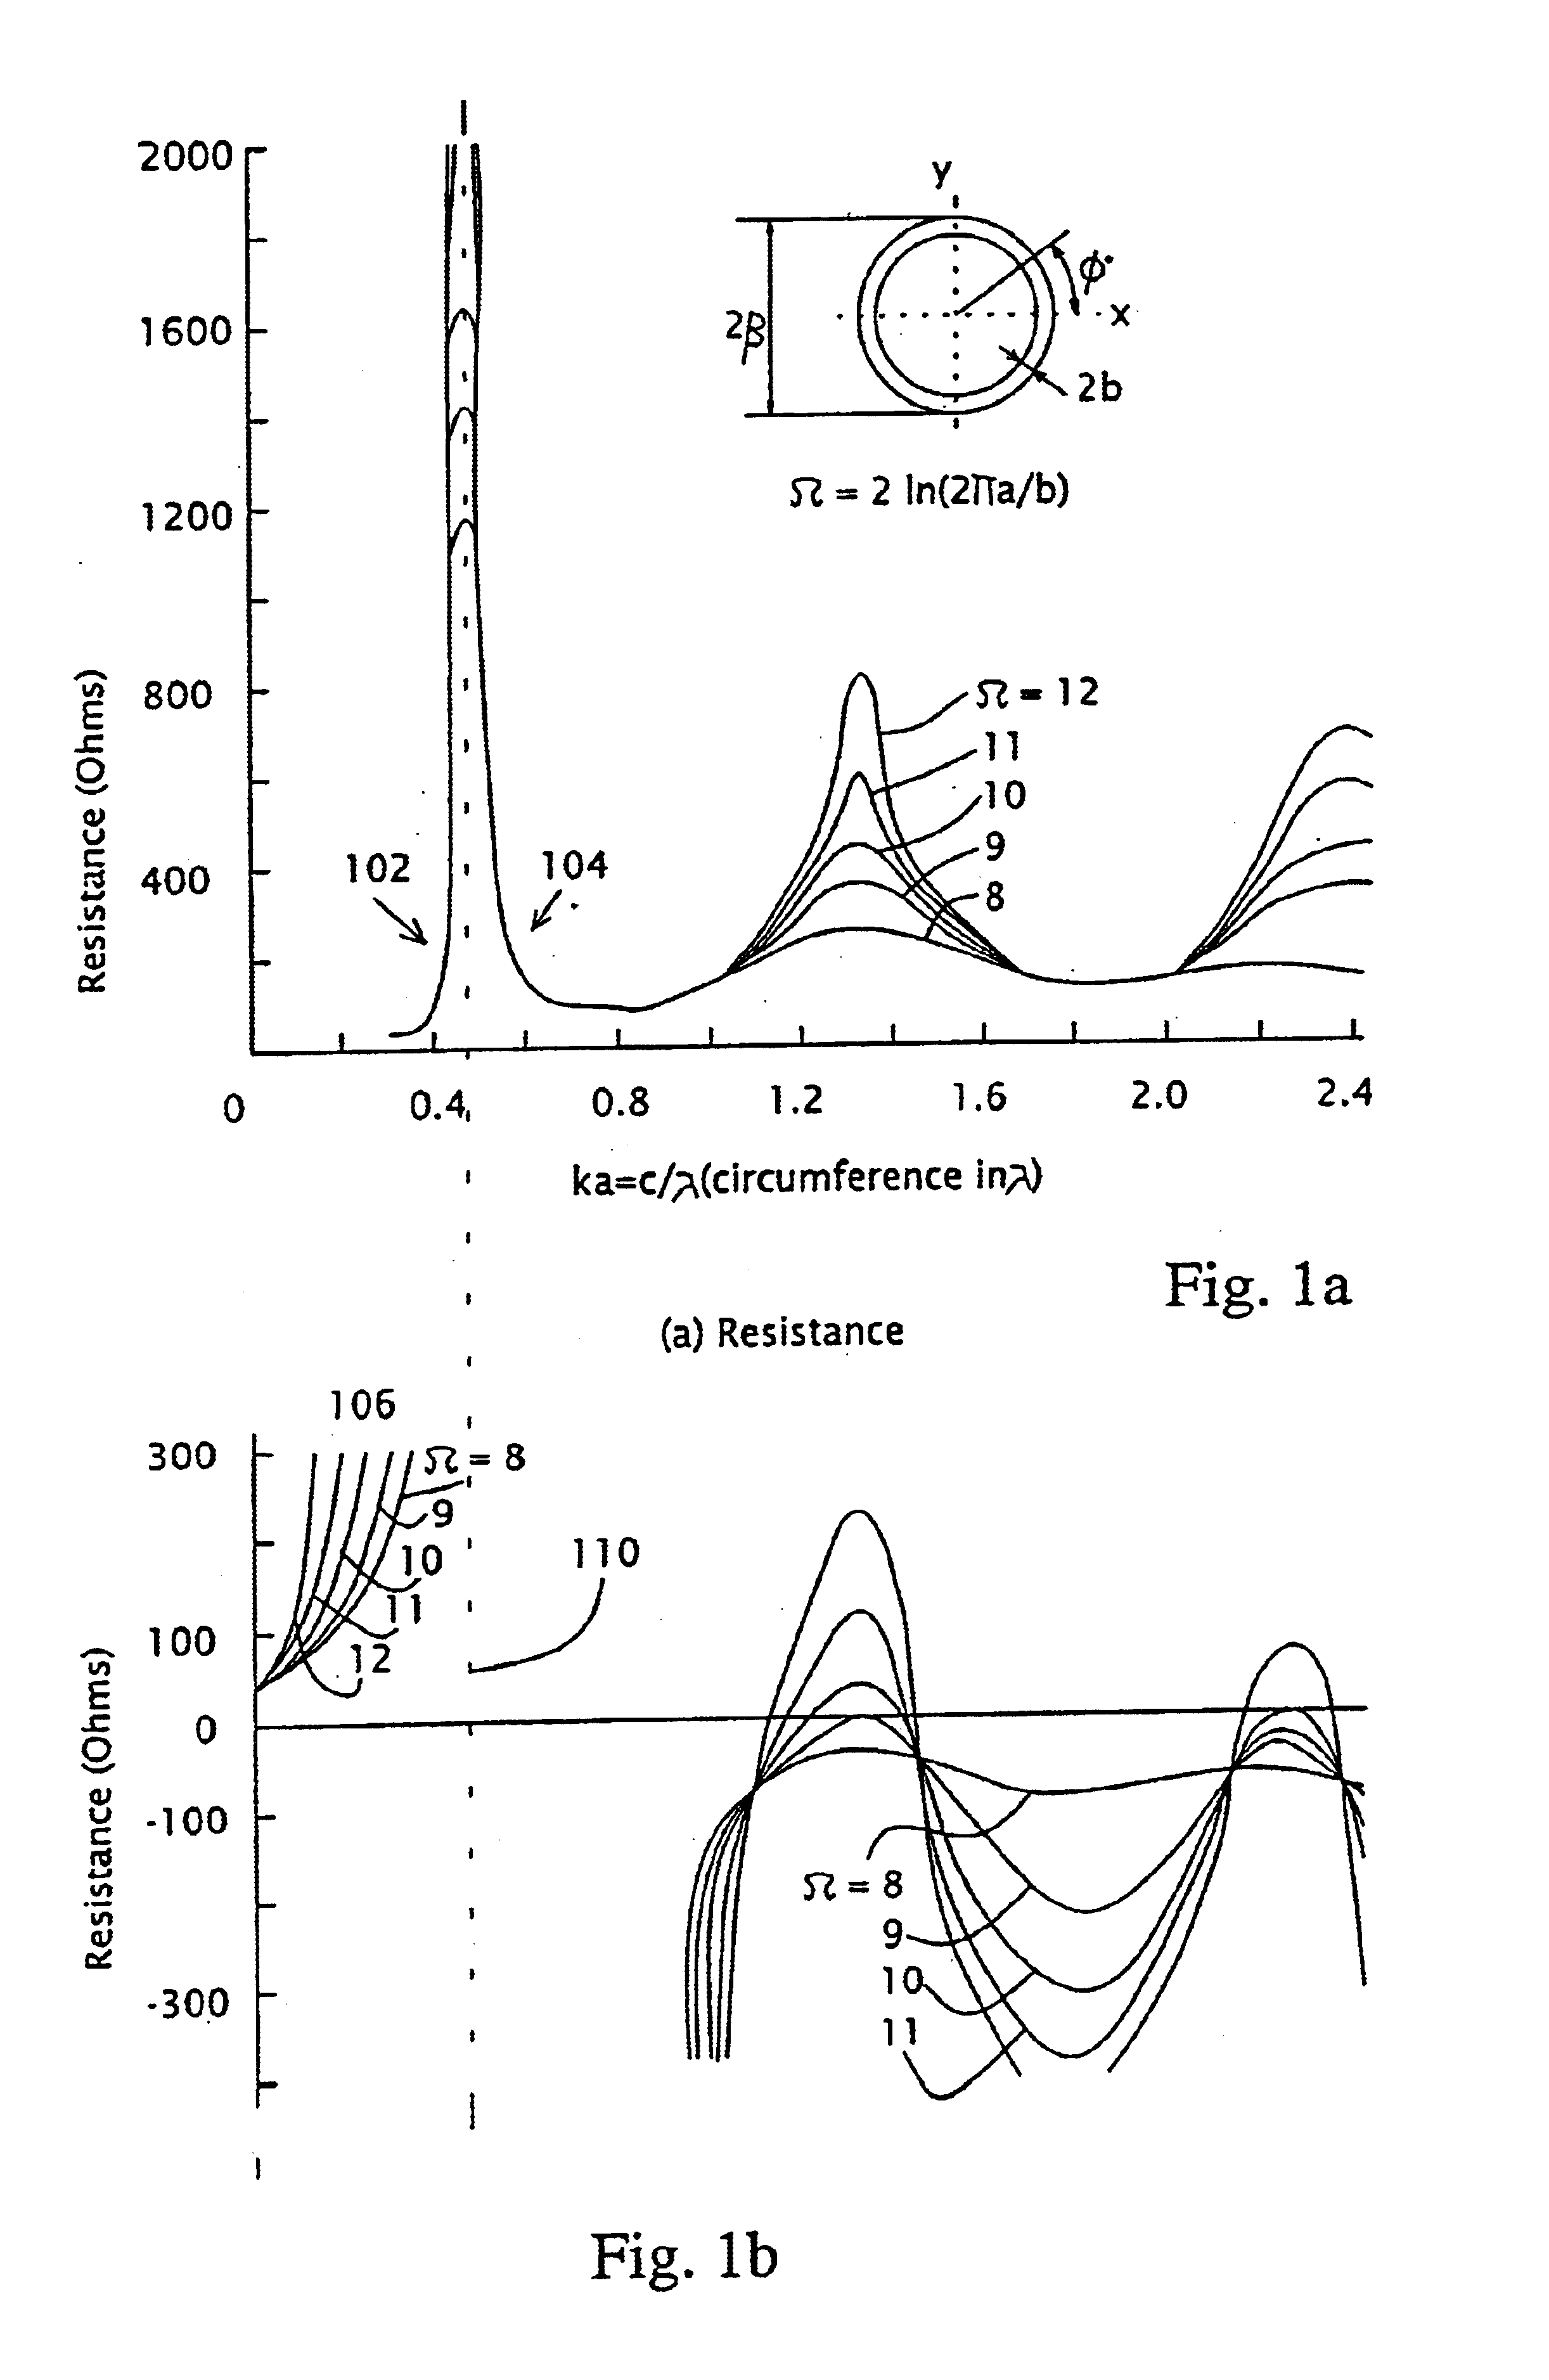 Method for designing a small antenna matched to an input impedance, and small antennas designed according to the method